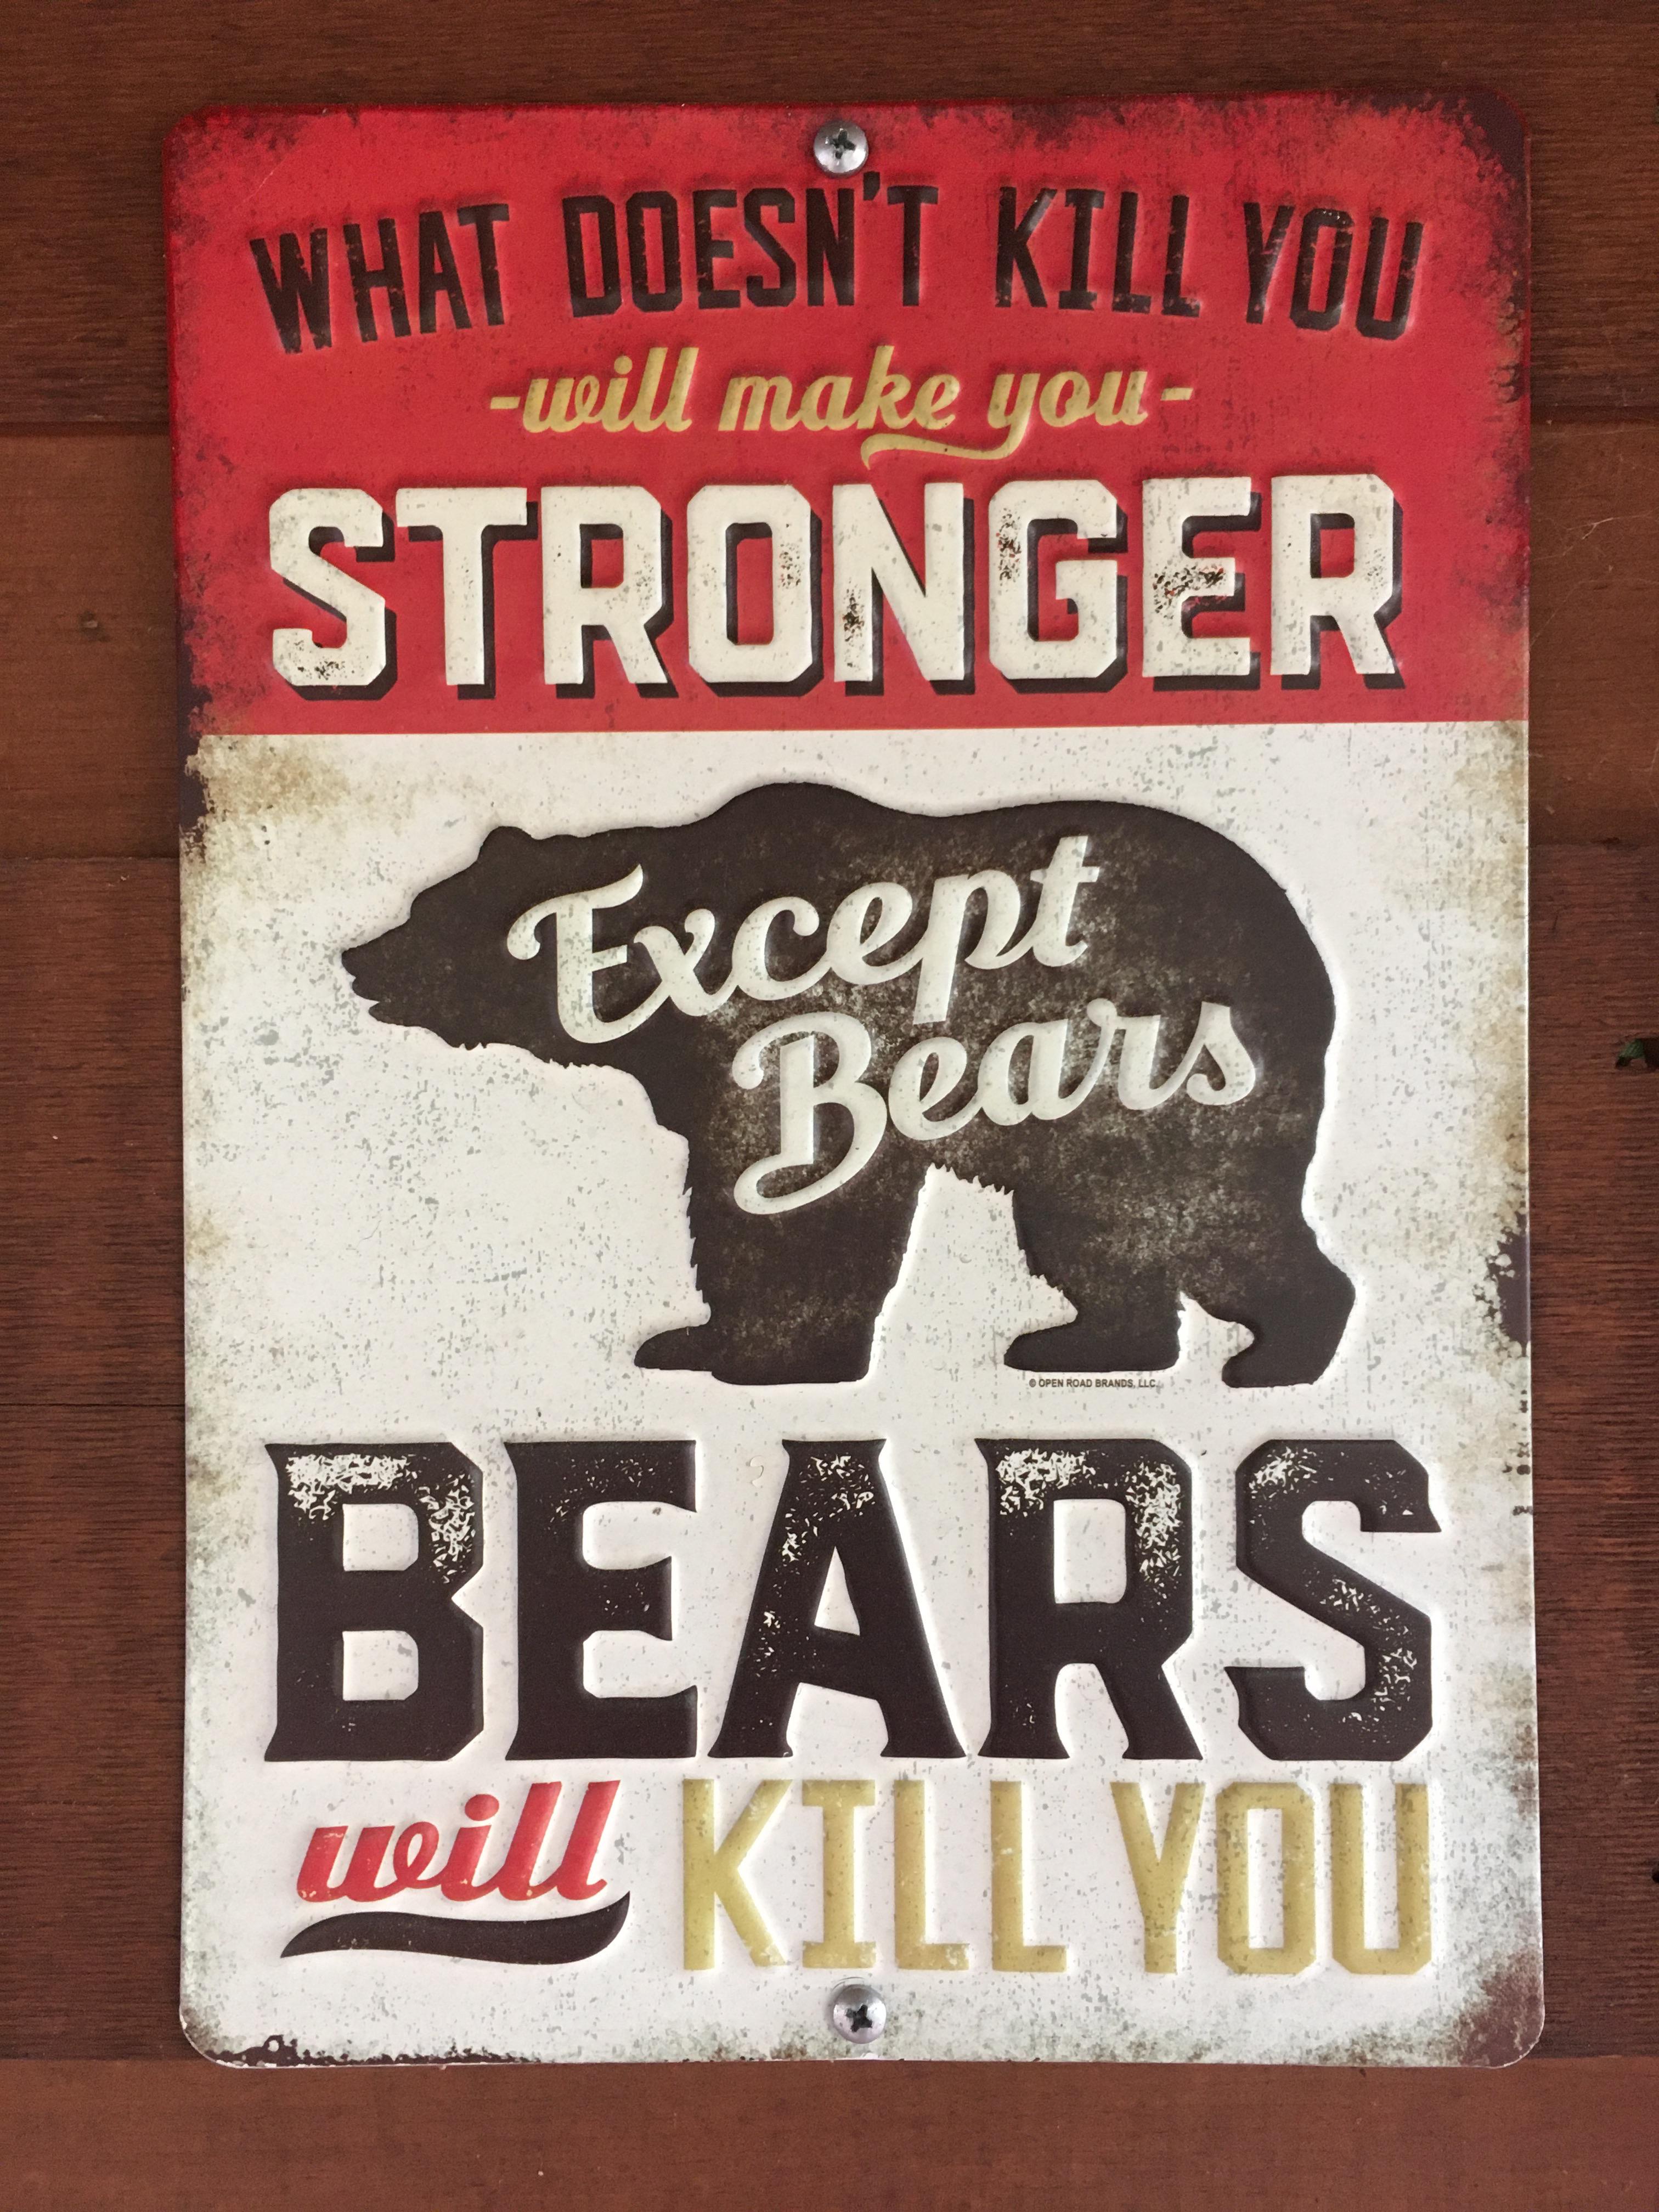 One of the things about bears, is...